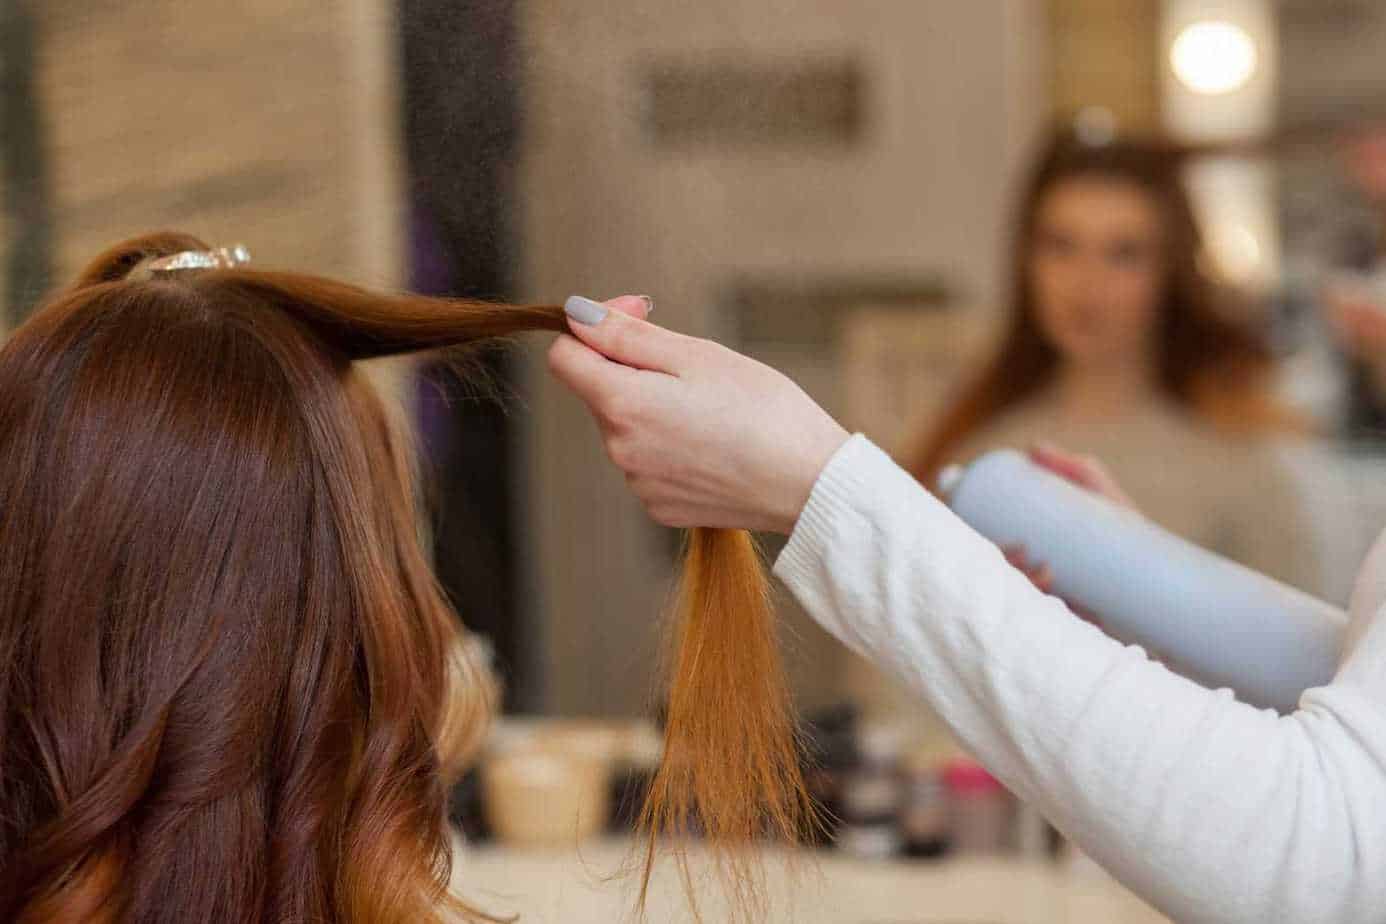 Which hair care rituals can lead to hair loss and damage?